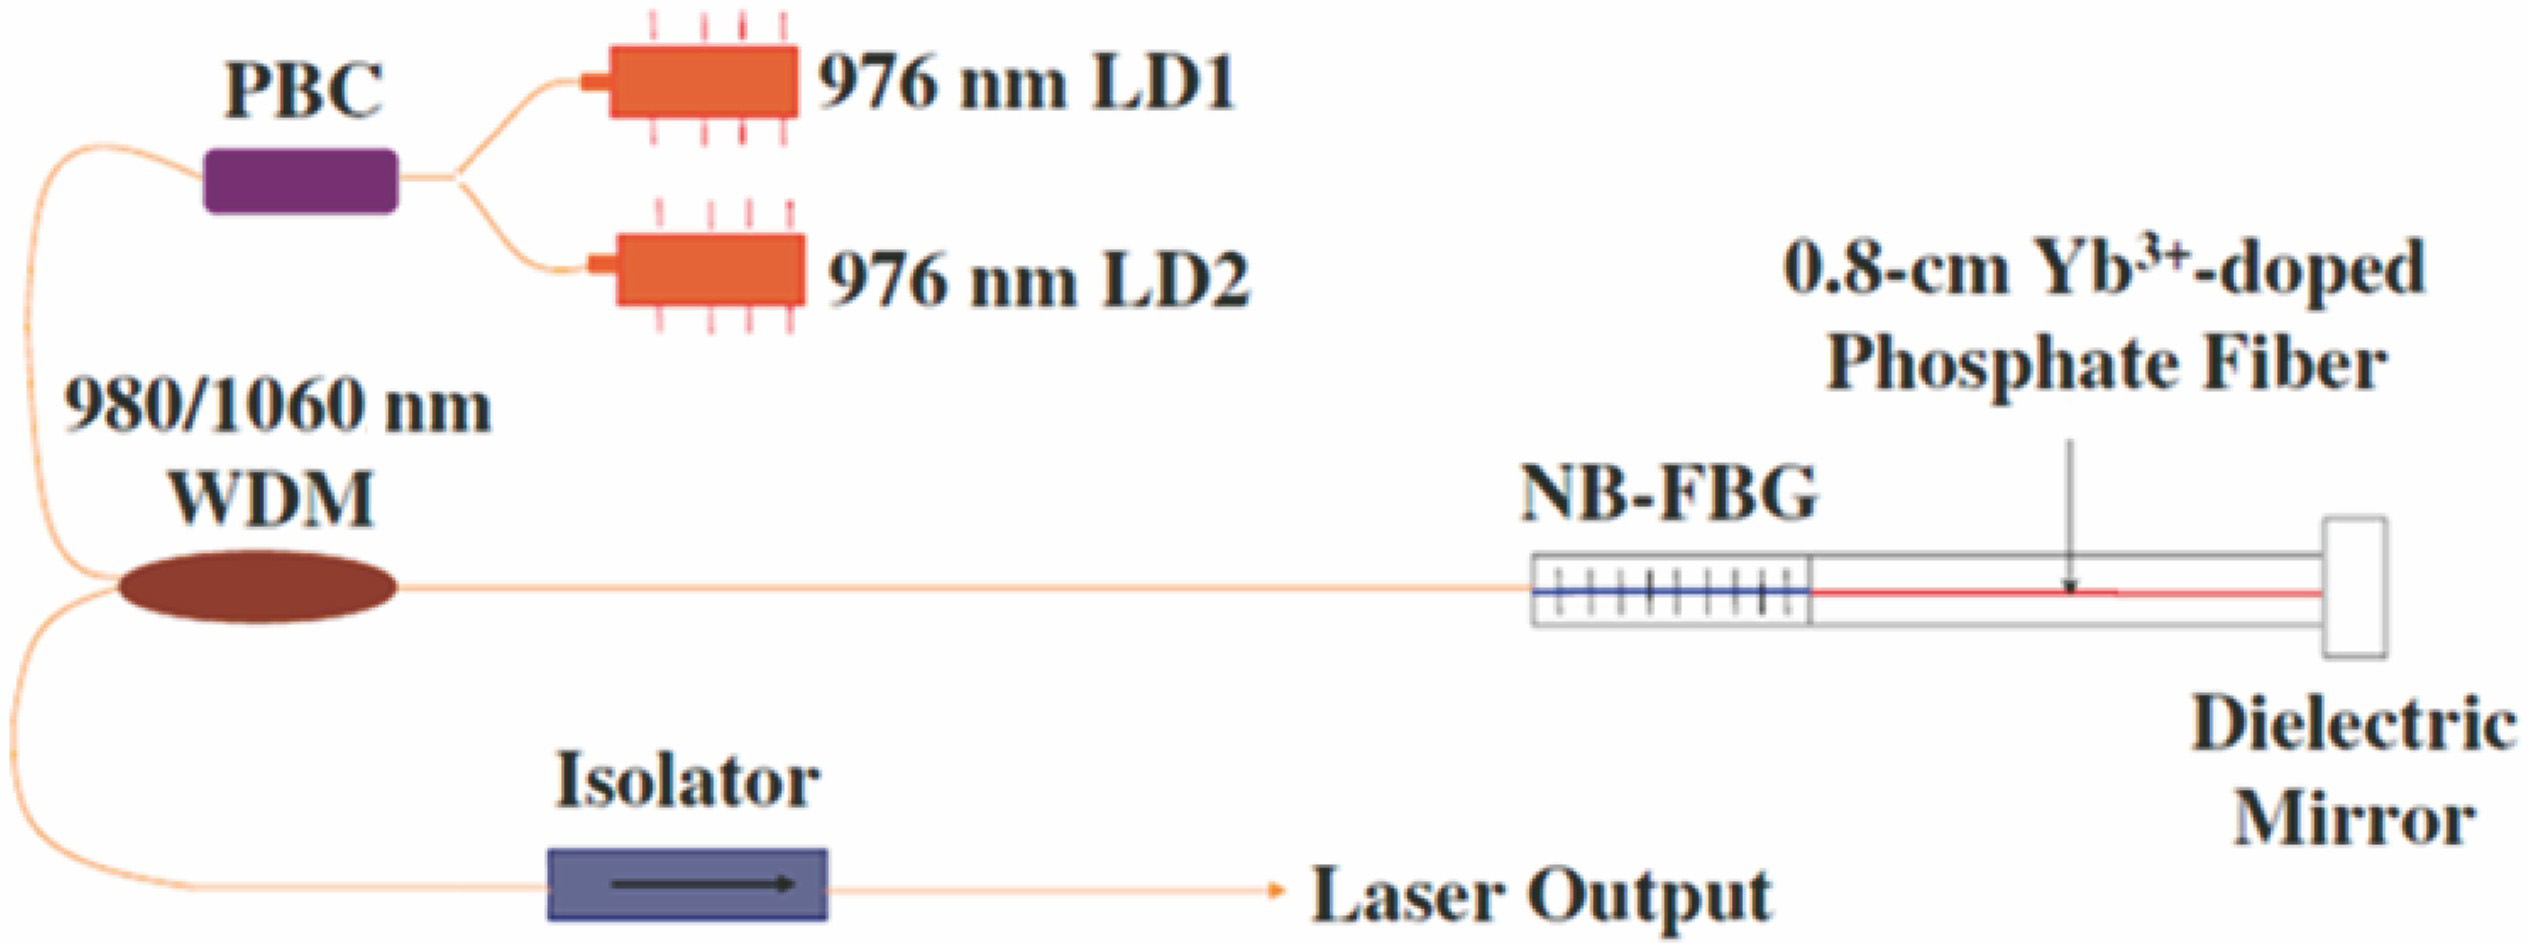 Experimental setup of short linear cavity Yb3+-doped single-frequency phosphate fiber laser[11]